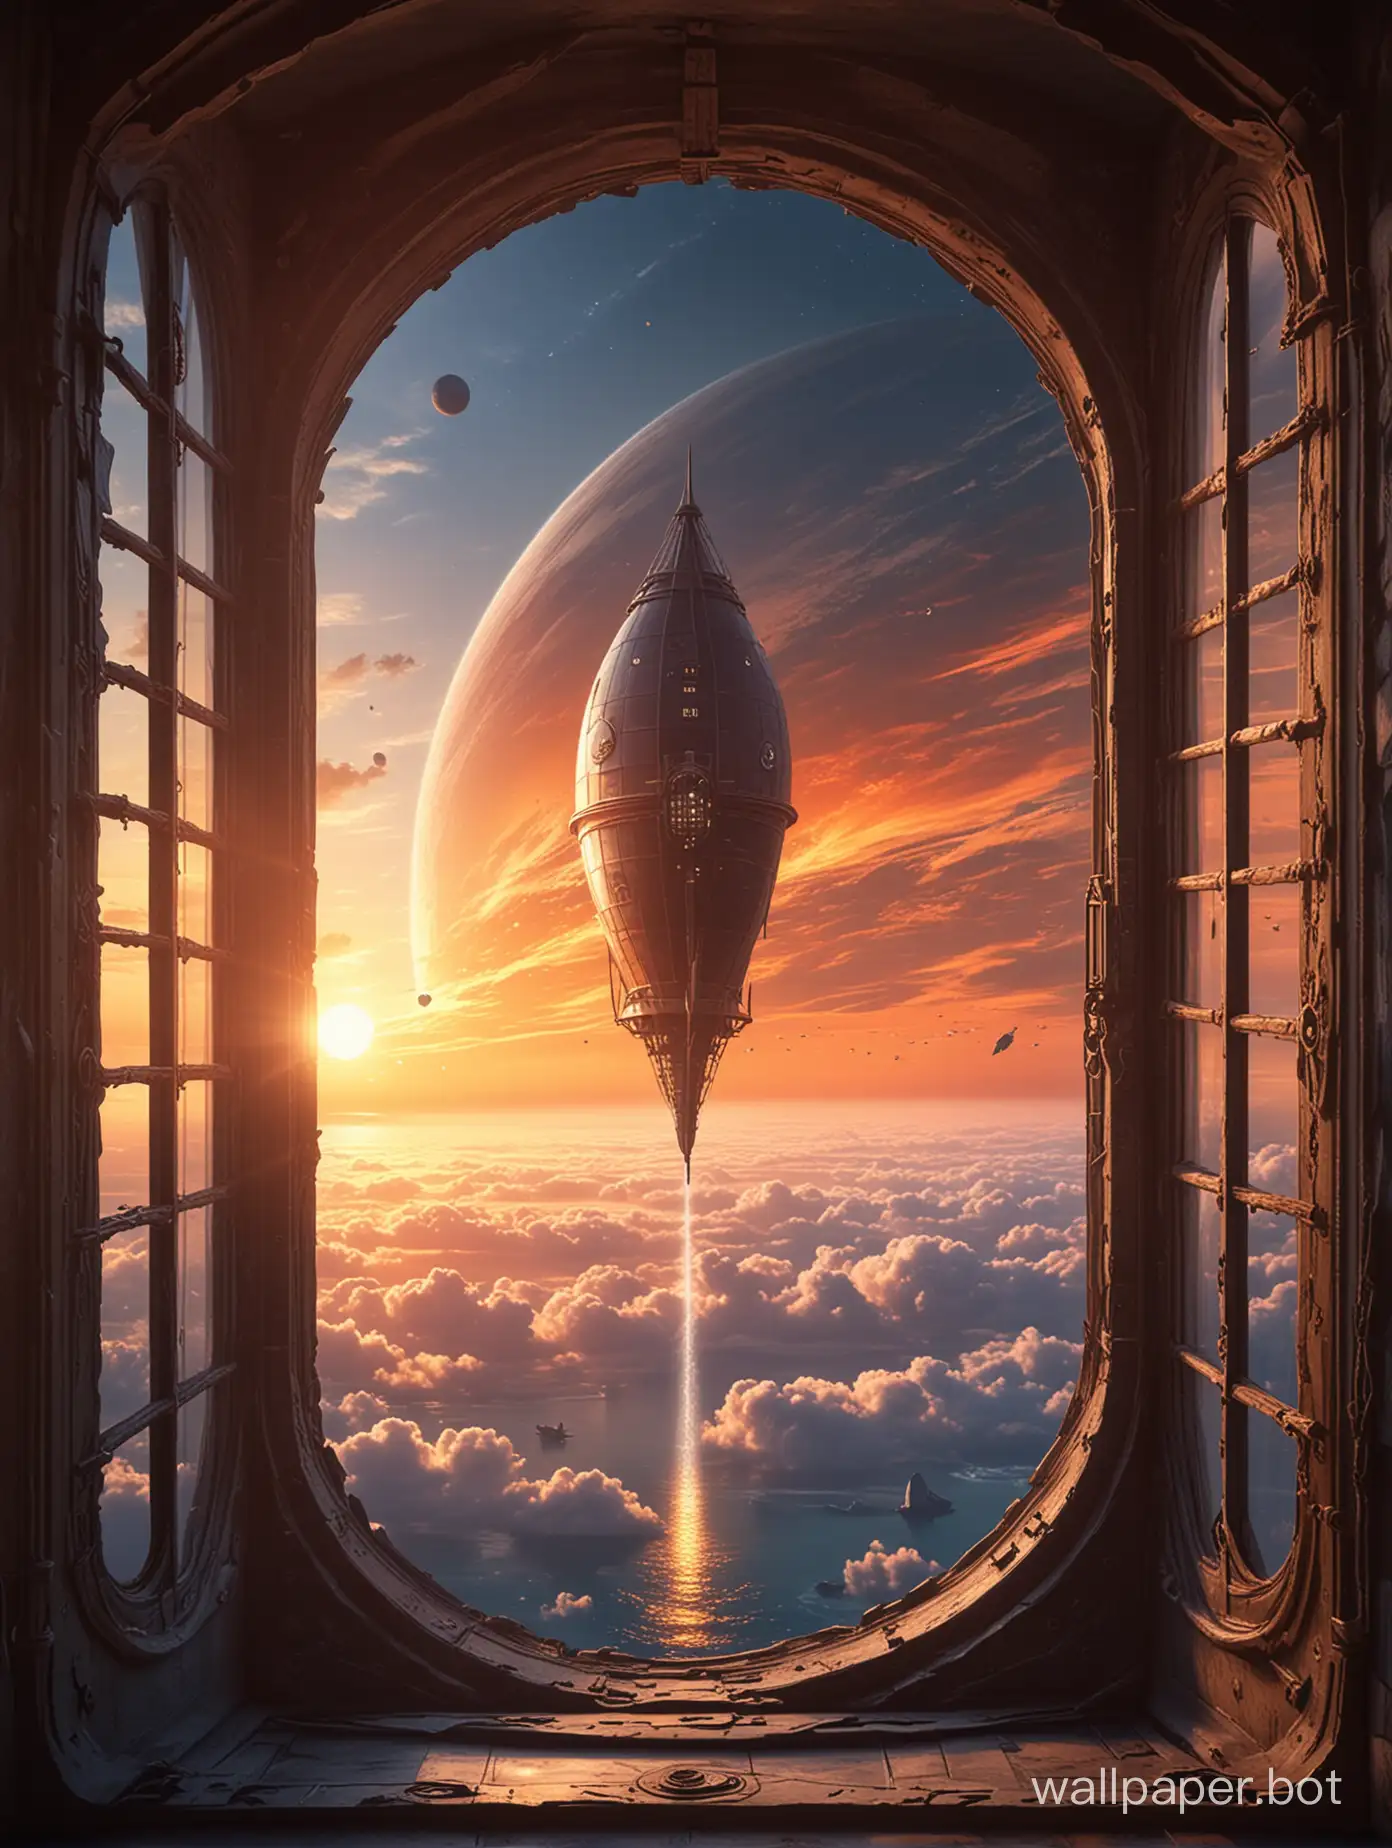 A narrow window into a fantastic space with a planet. fantastic tower against sunset background. There is an airship with sails in the sky. High resolution. Very definition.  sci-fi. Anime